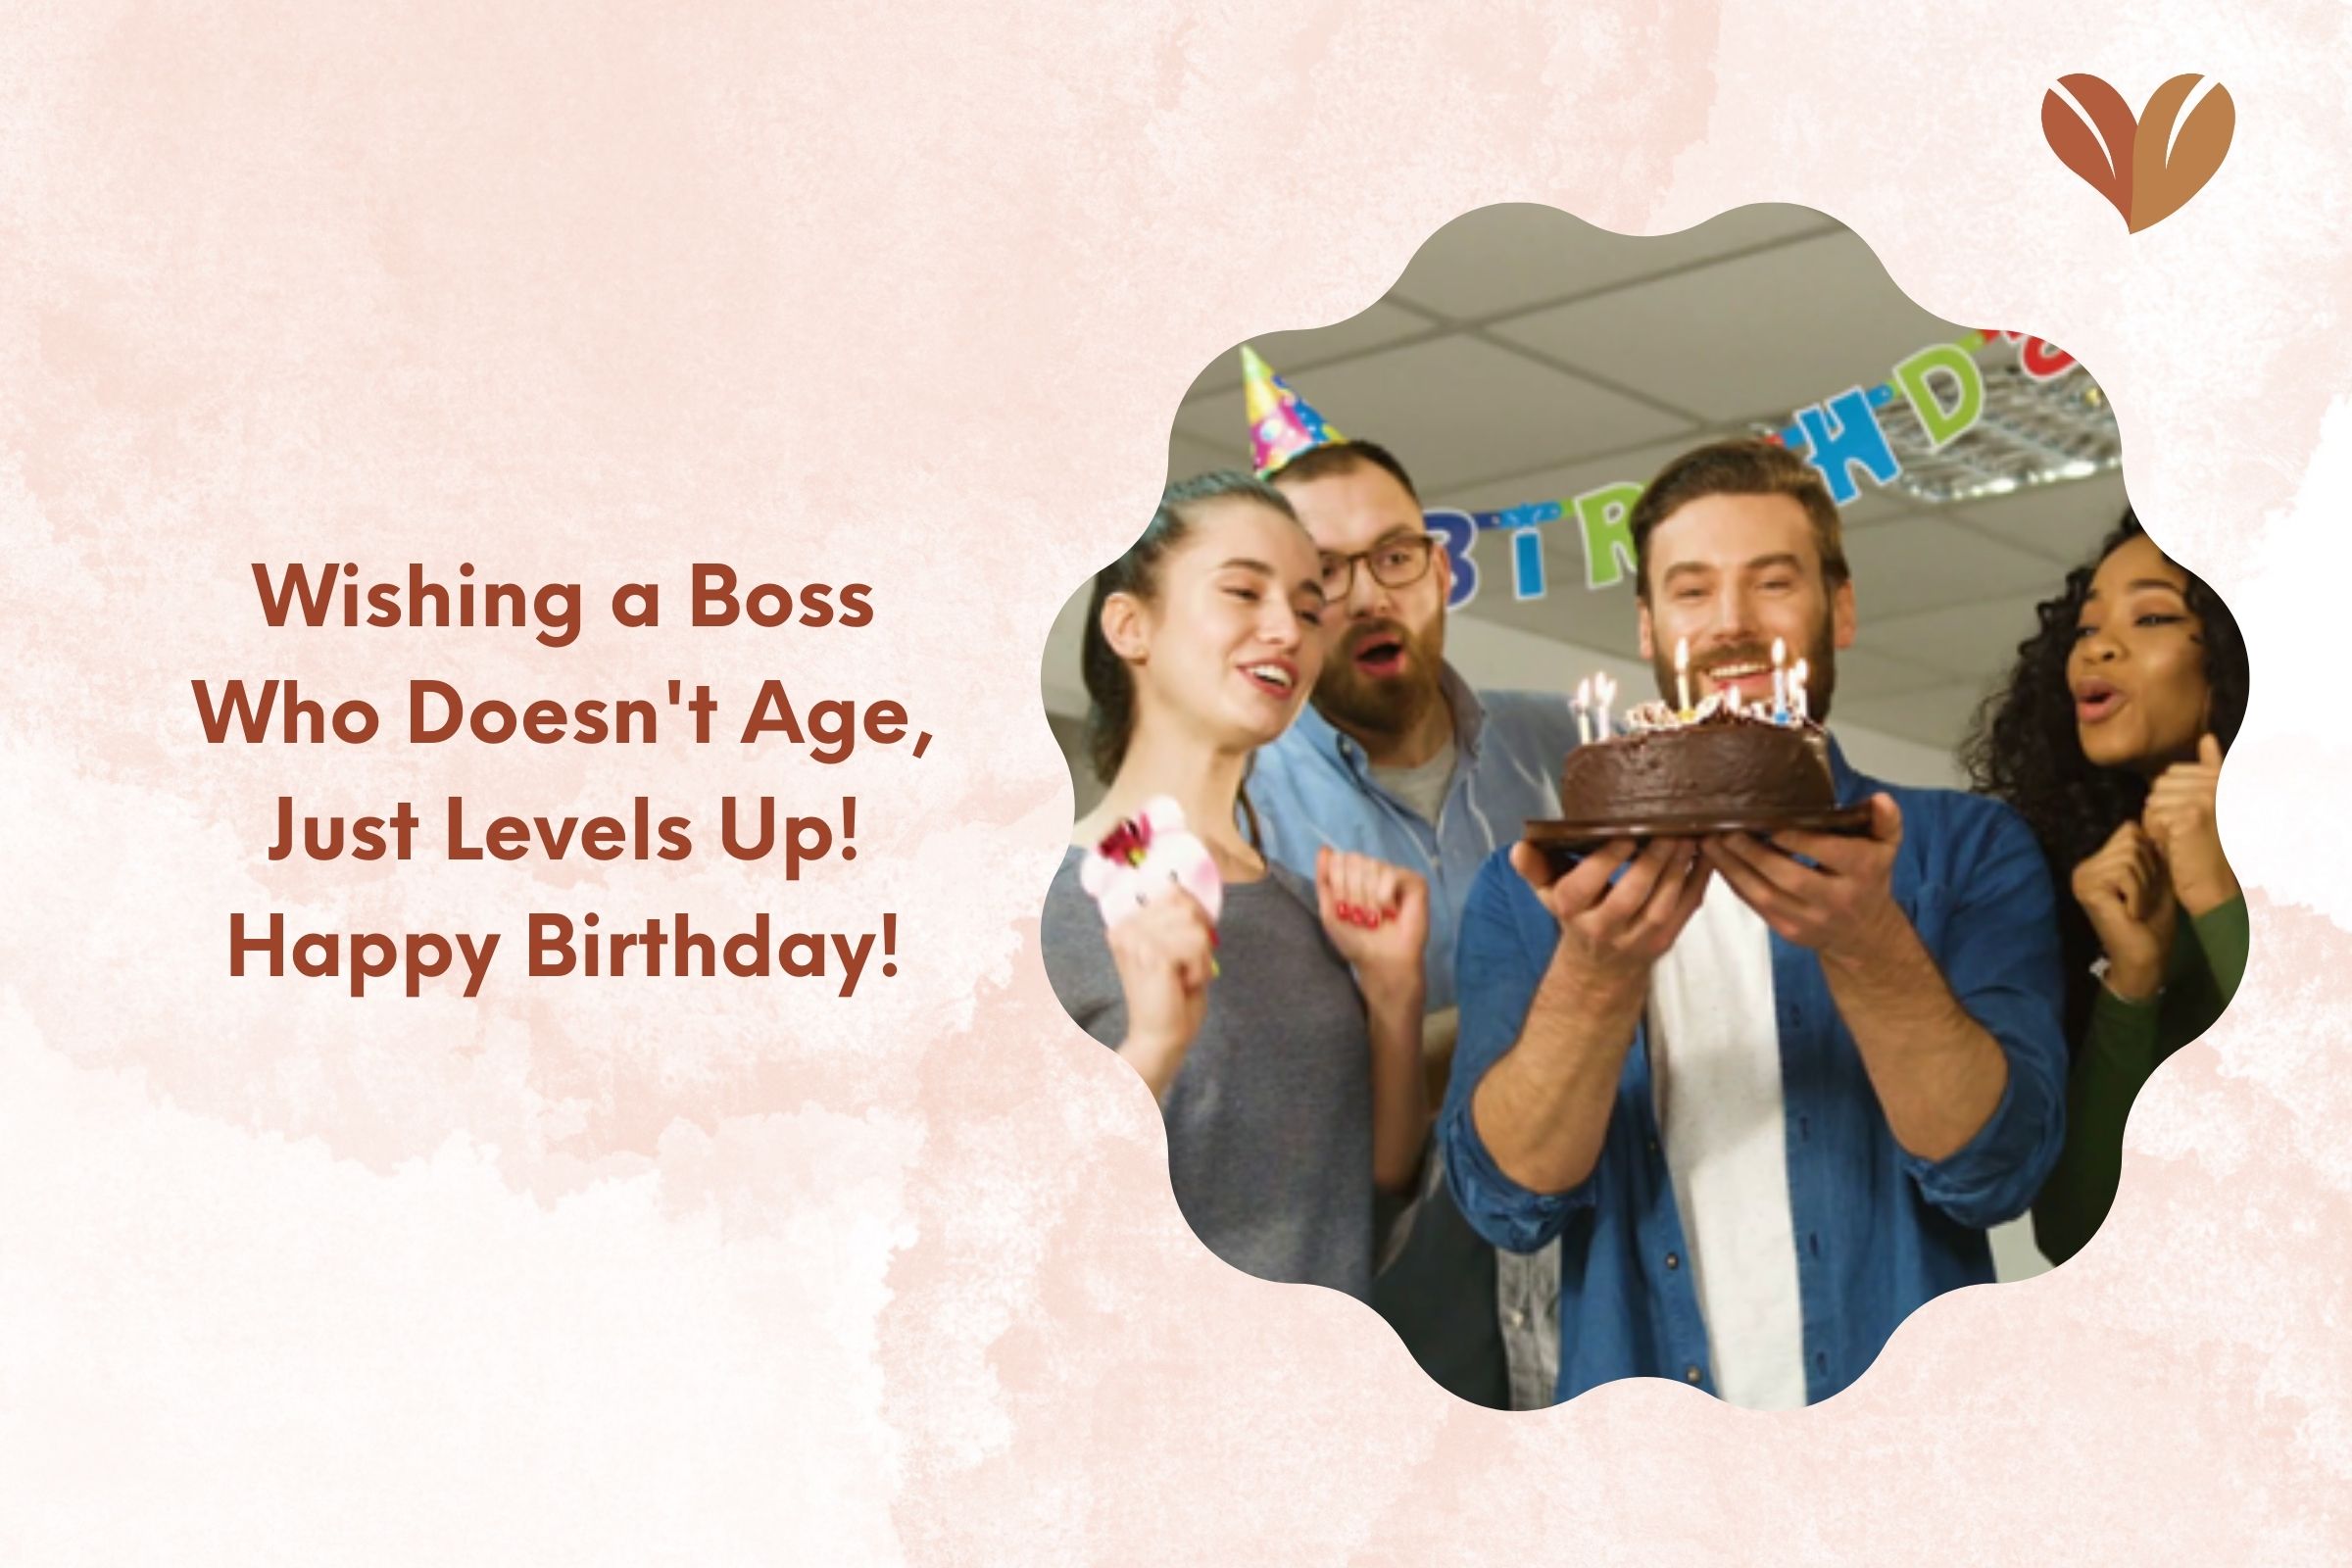 Executive touch in professional birthday wishes for boss.